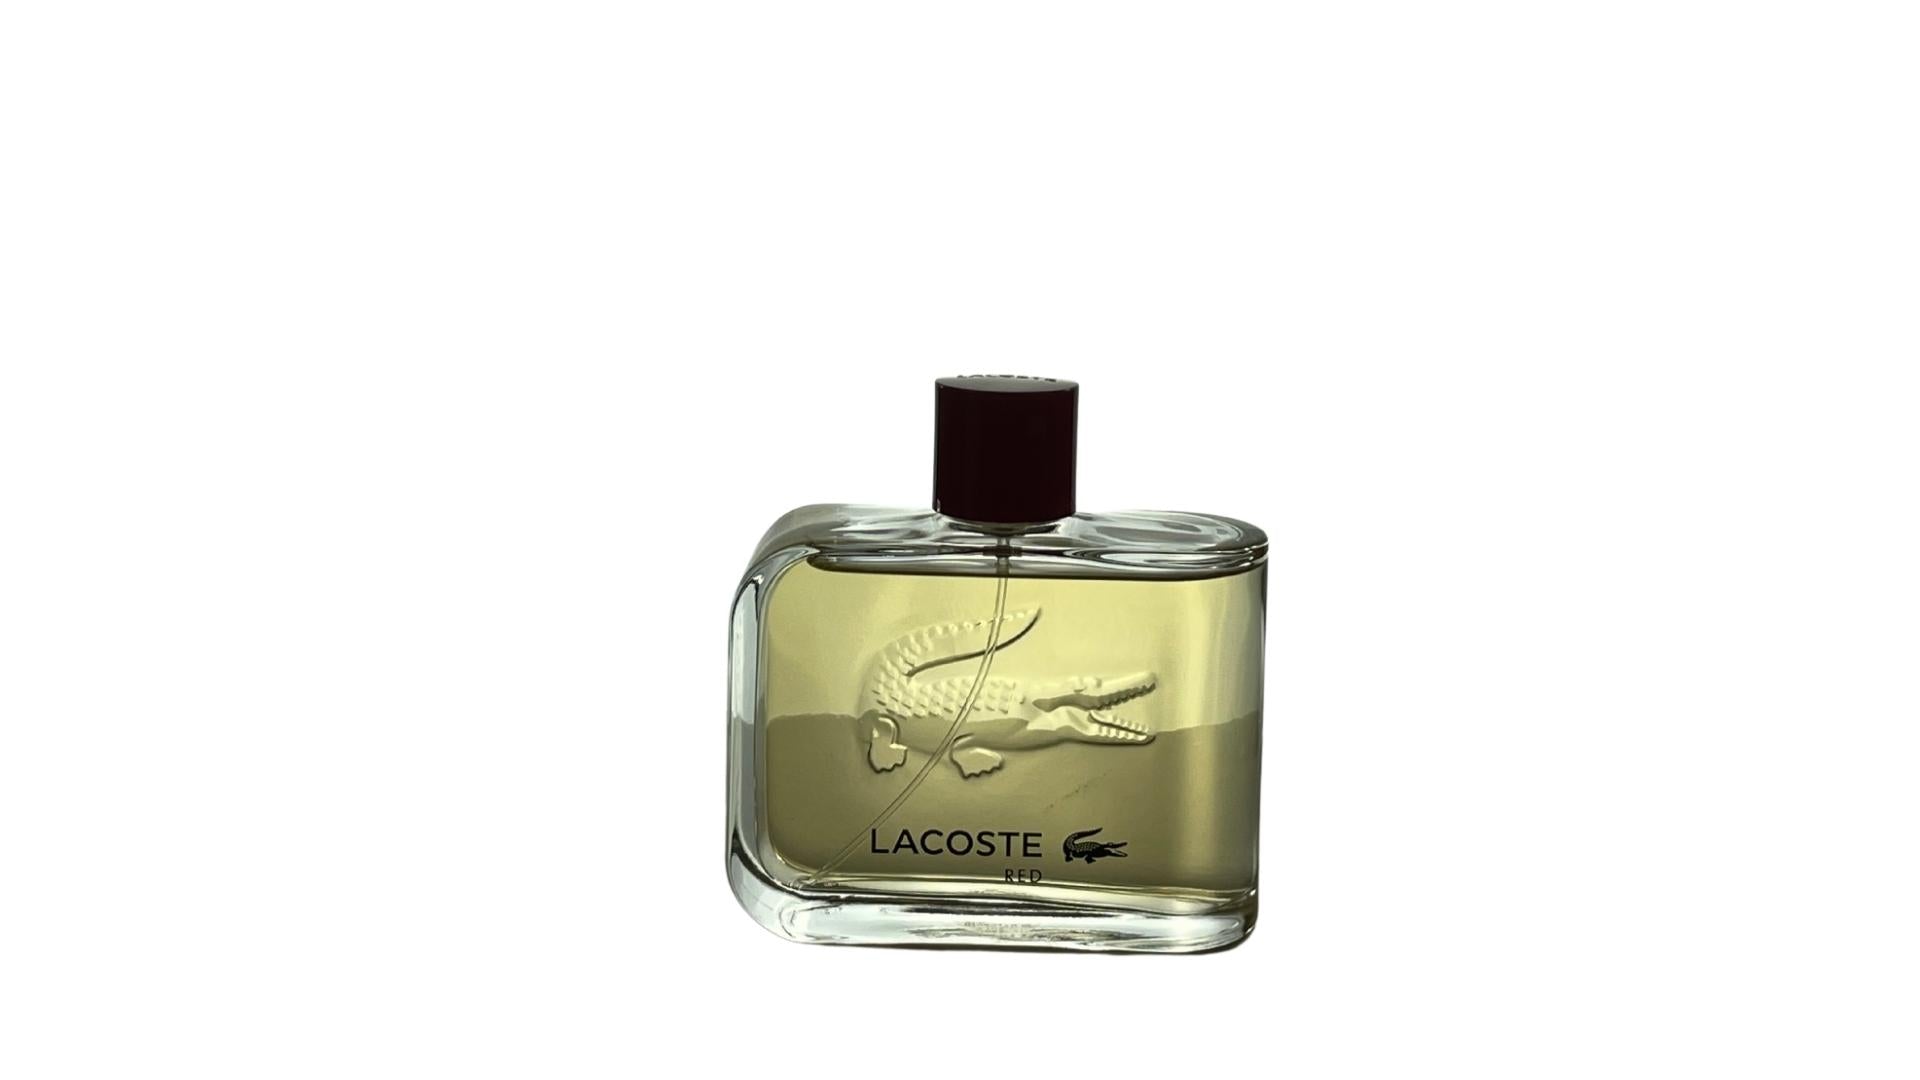 Lacoste Red Style In Play Cologne Eau De Toilette by Lacoste